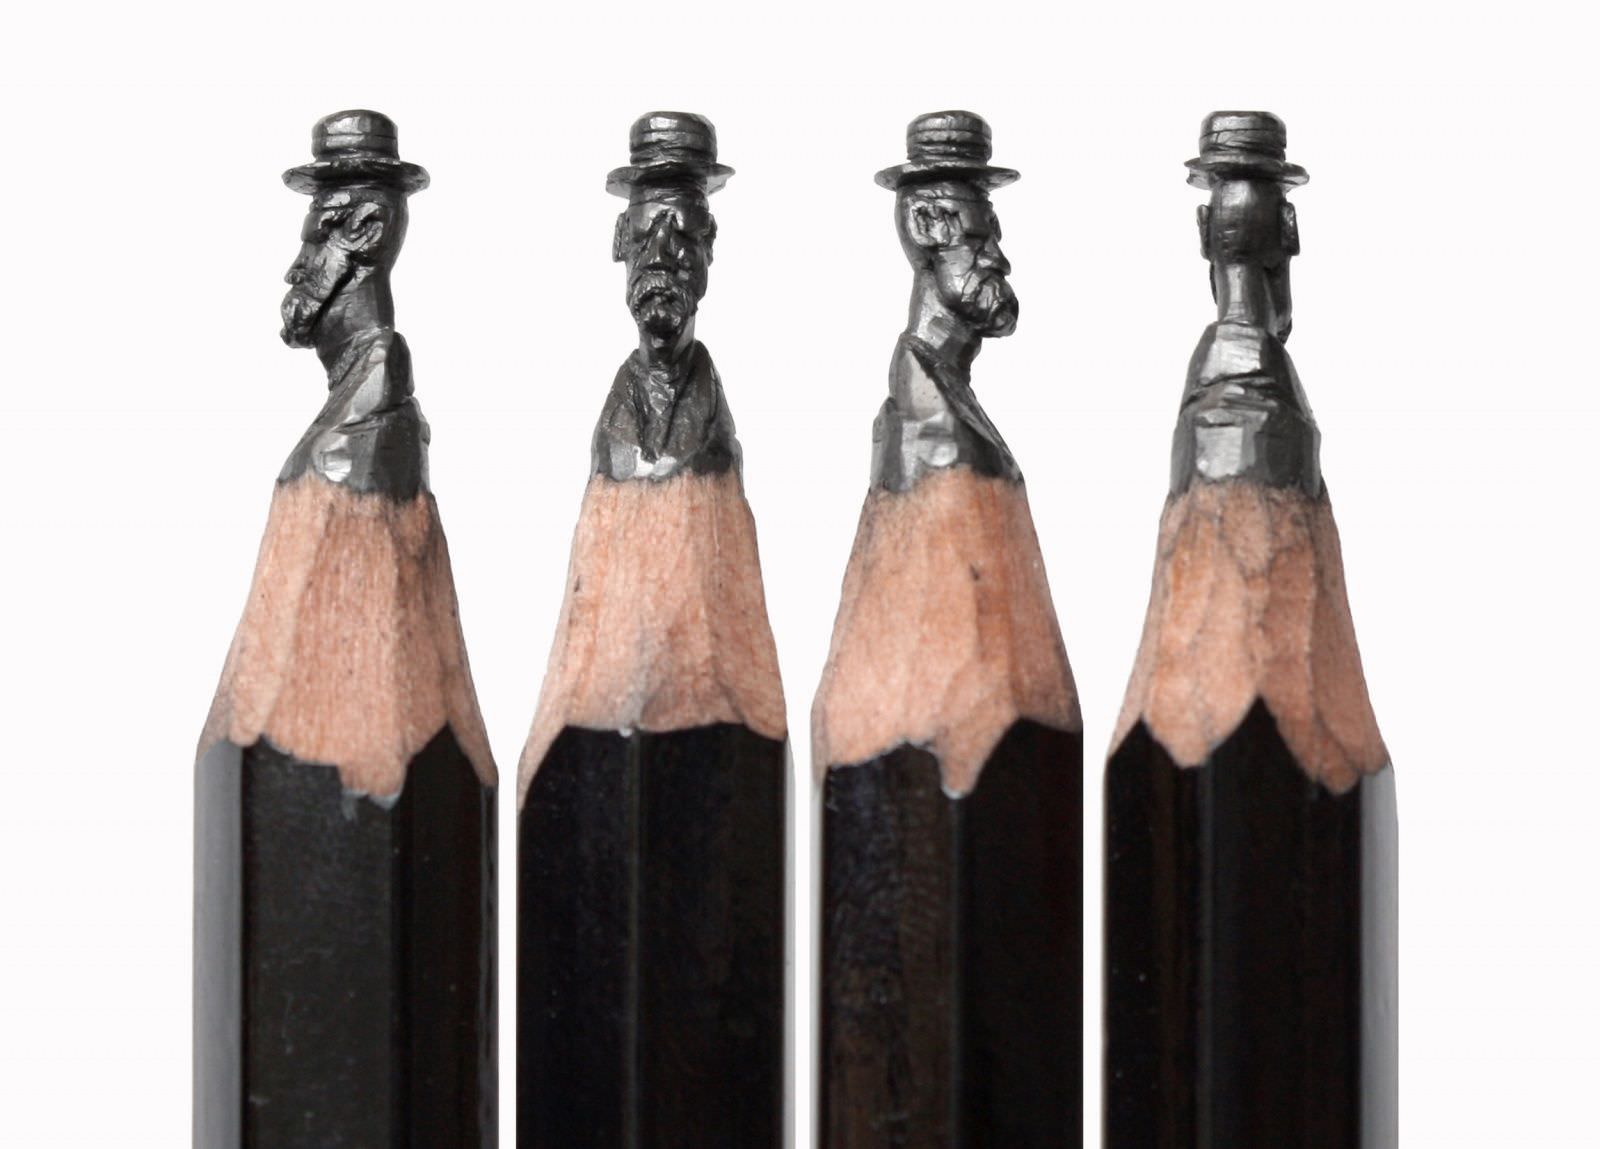 This Man Makes Miniature Art Into Pencils – You Won’t Believe the Detail!